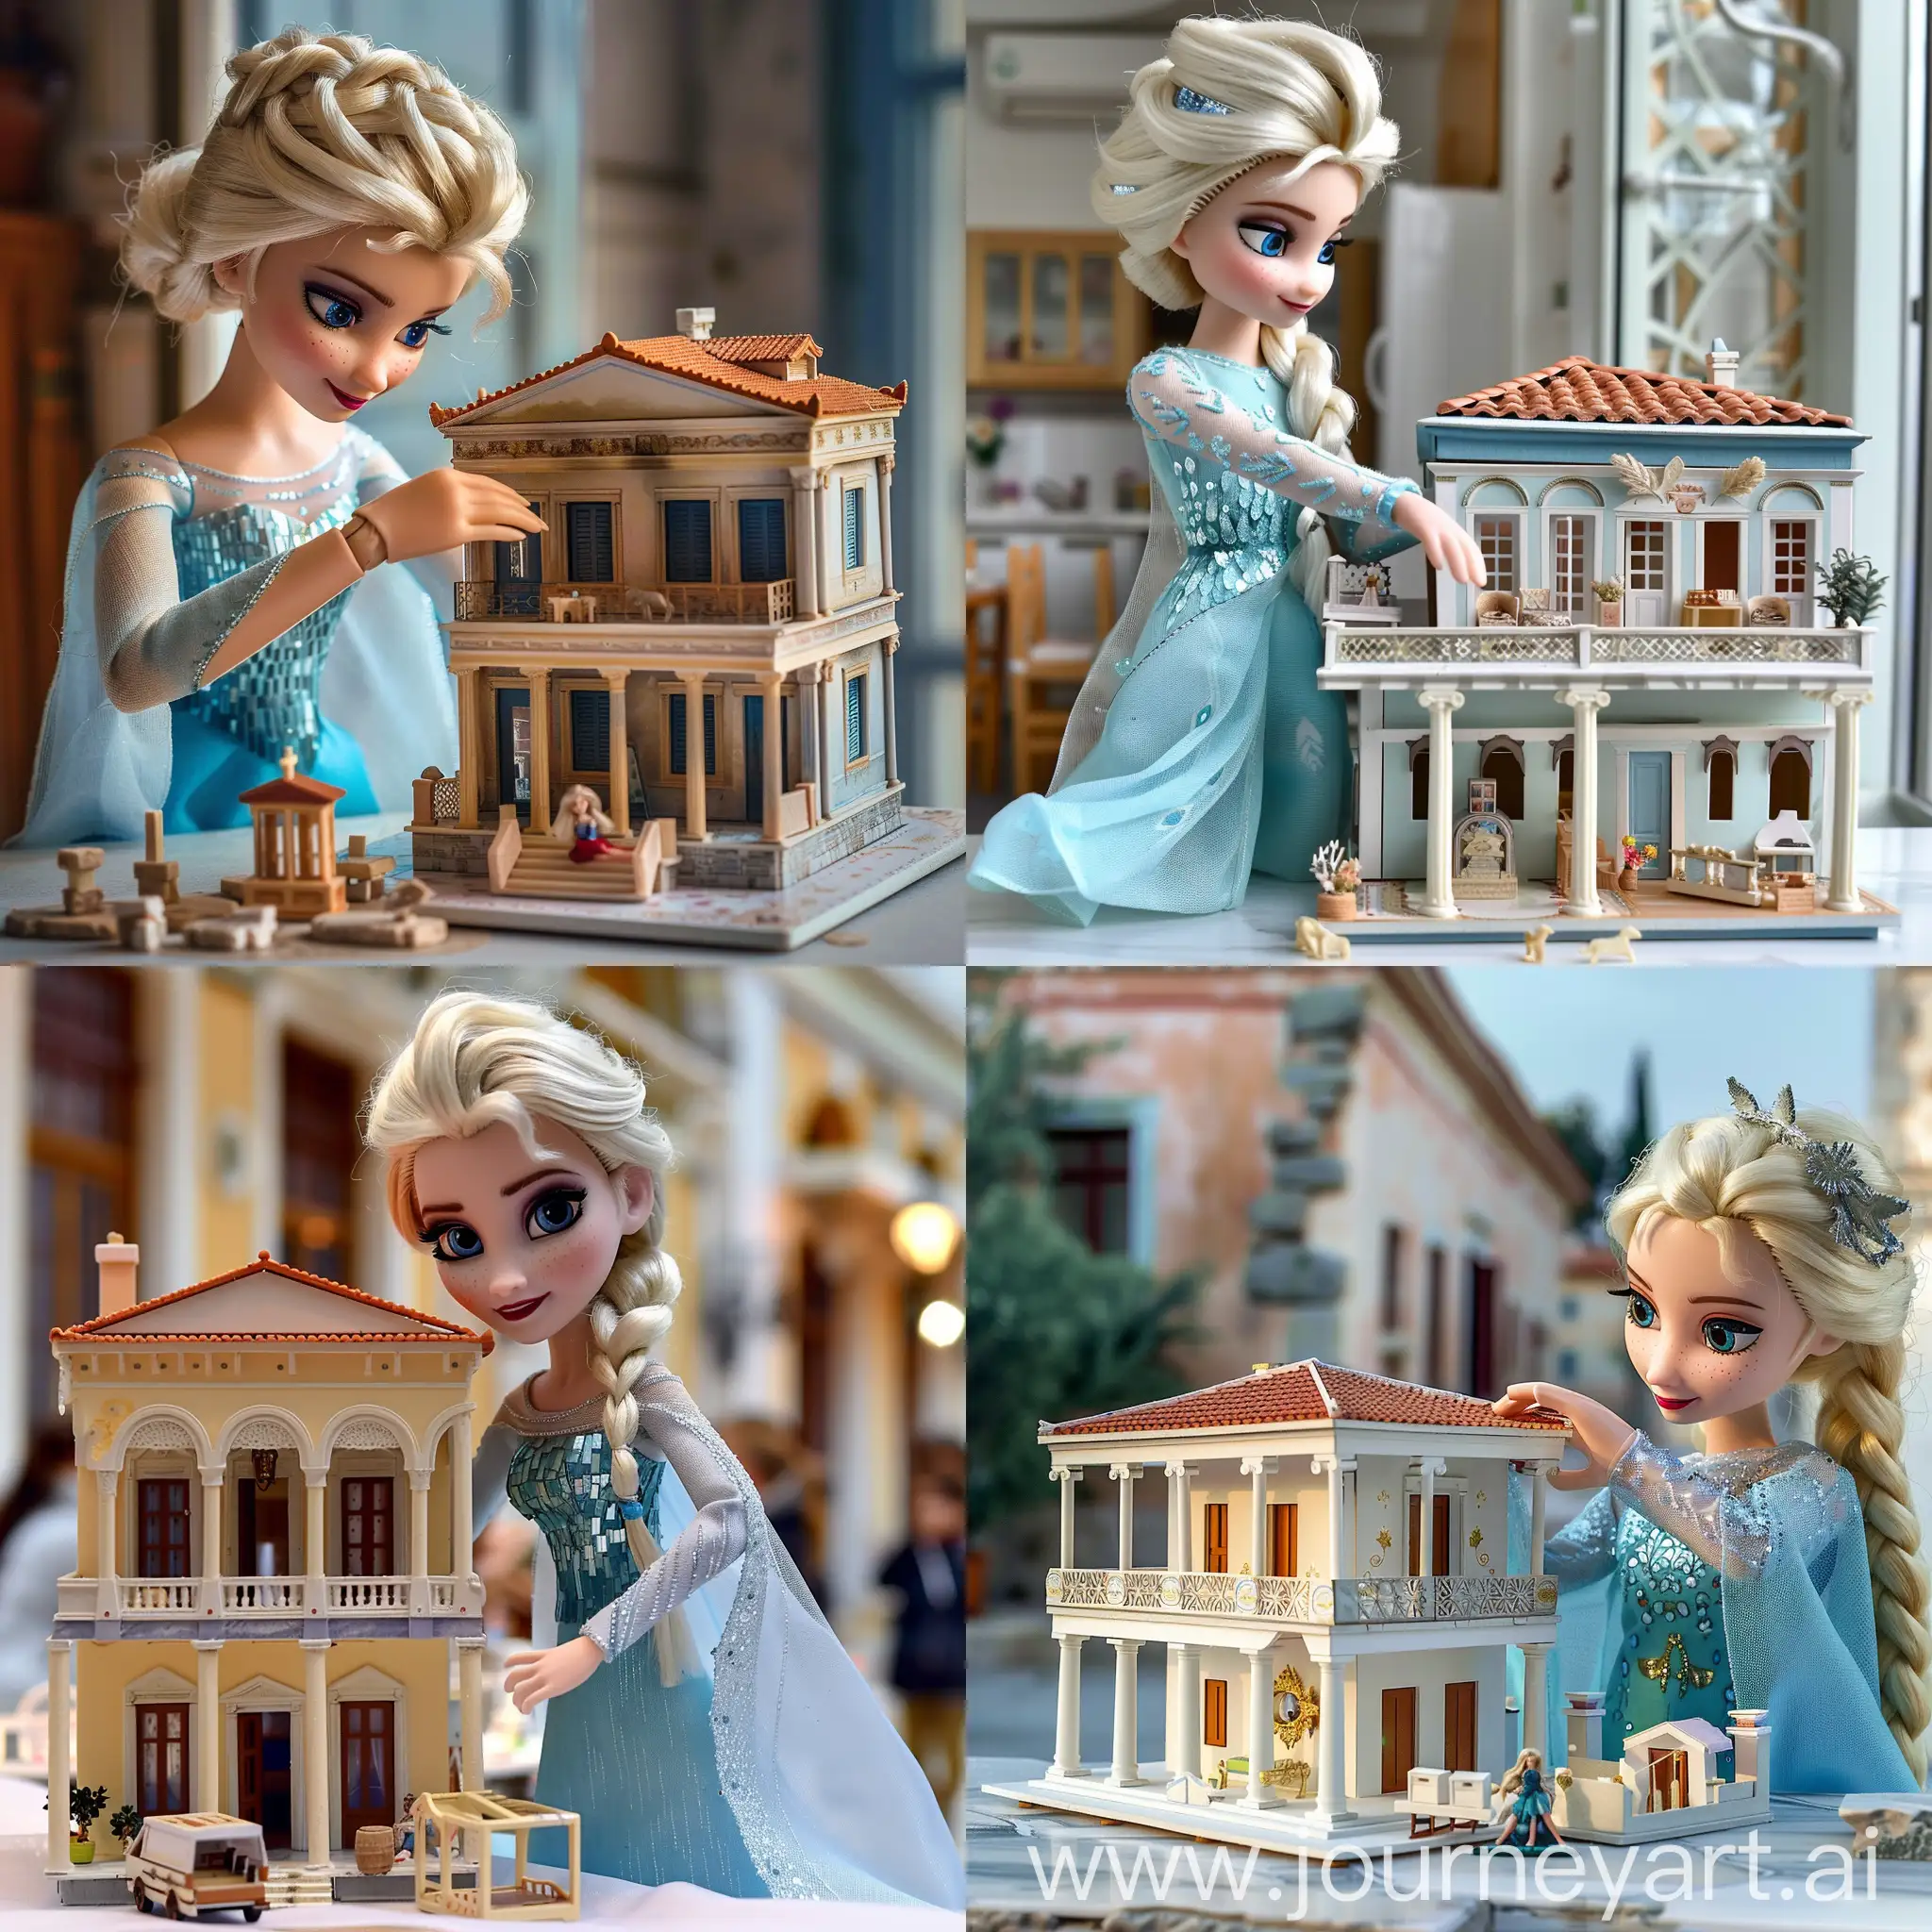 Elsa-Frozen-Playing-with-Dollhouse-in-Athens-Greece